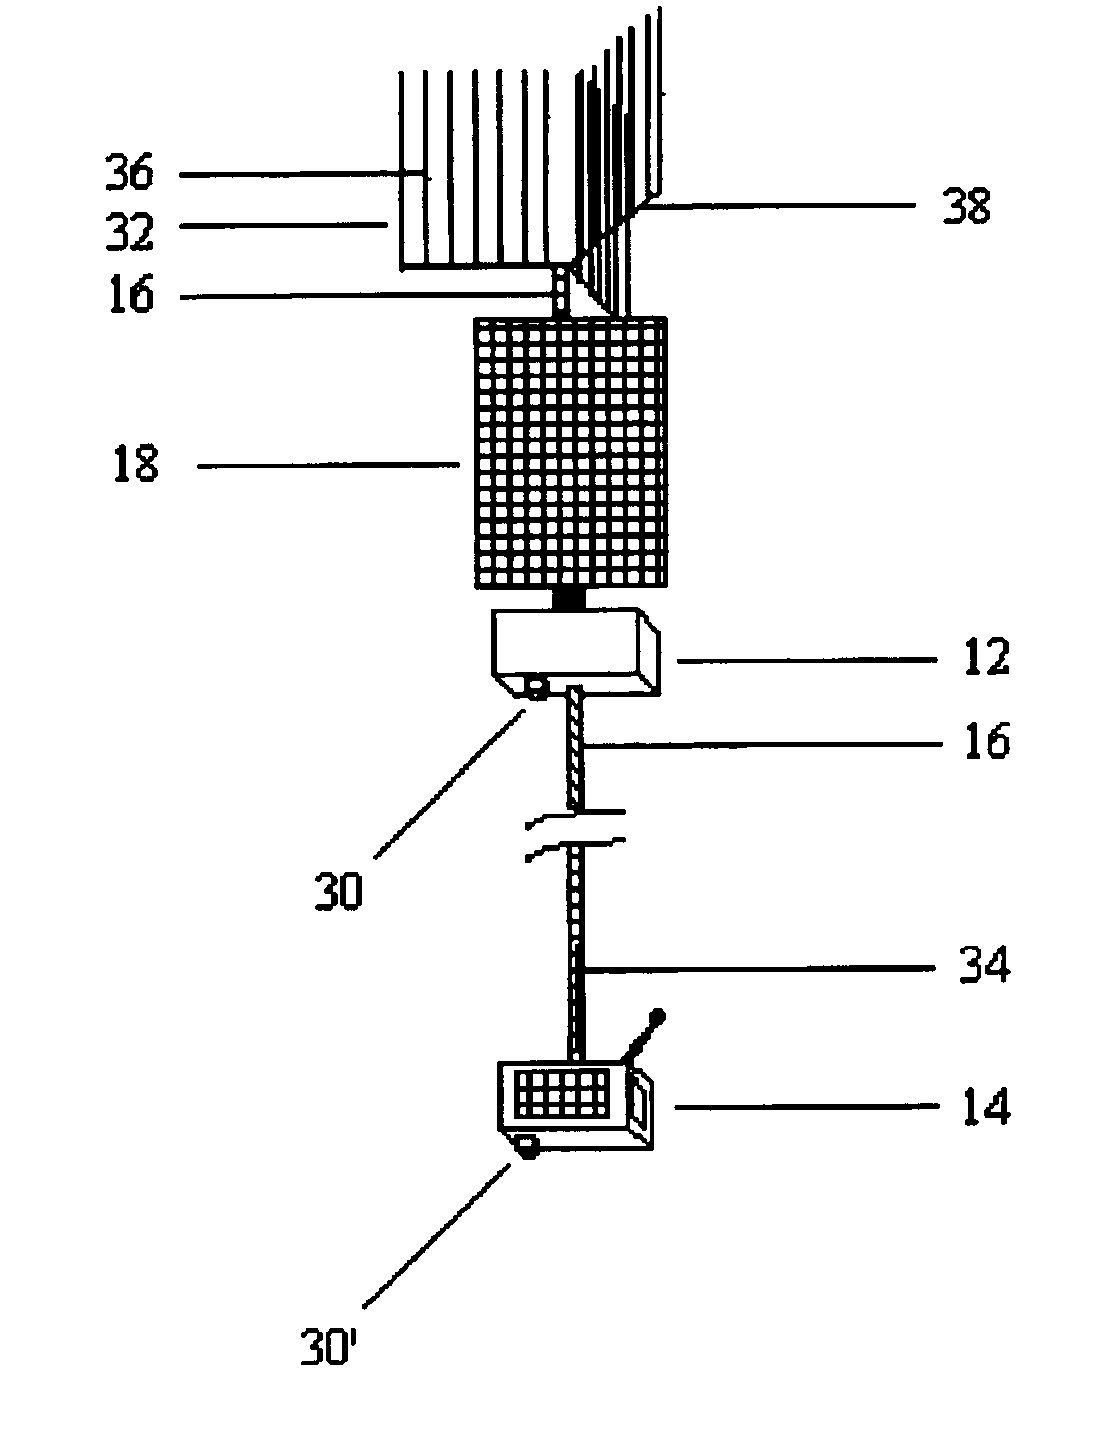 Method and apparatus for propulsion and power generation using spinning electrodynamic tethers